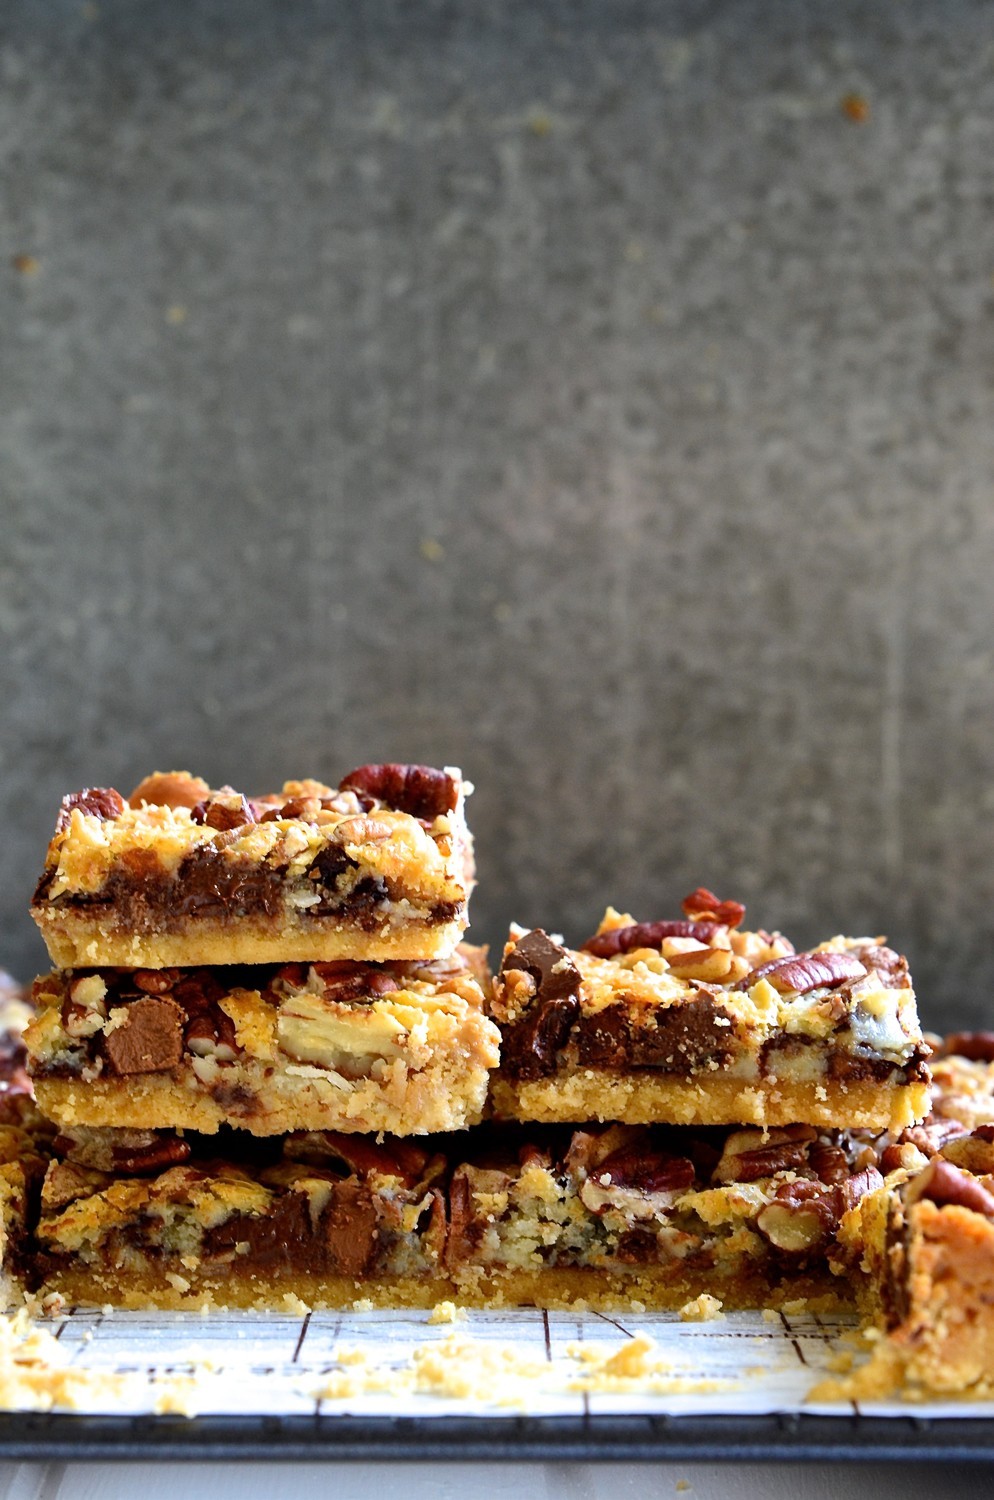 Peanut butter and toffee-caramel chocolate bars